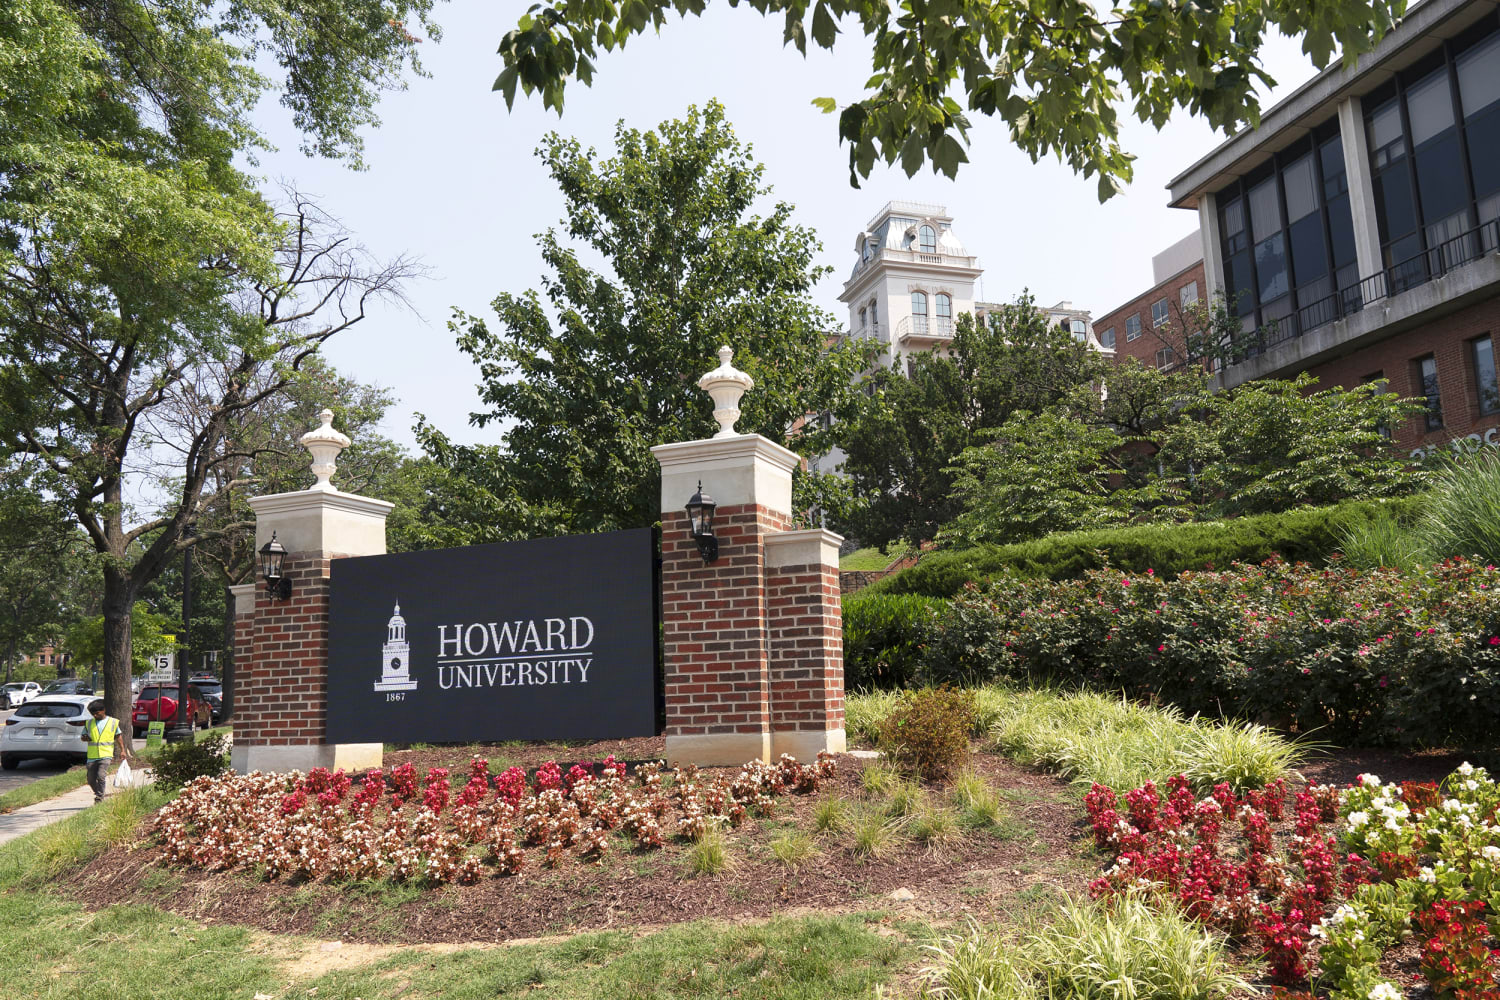 White student expelled from Howard University’s law school sues over racial discrimination